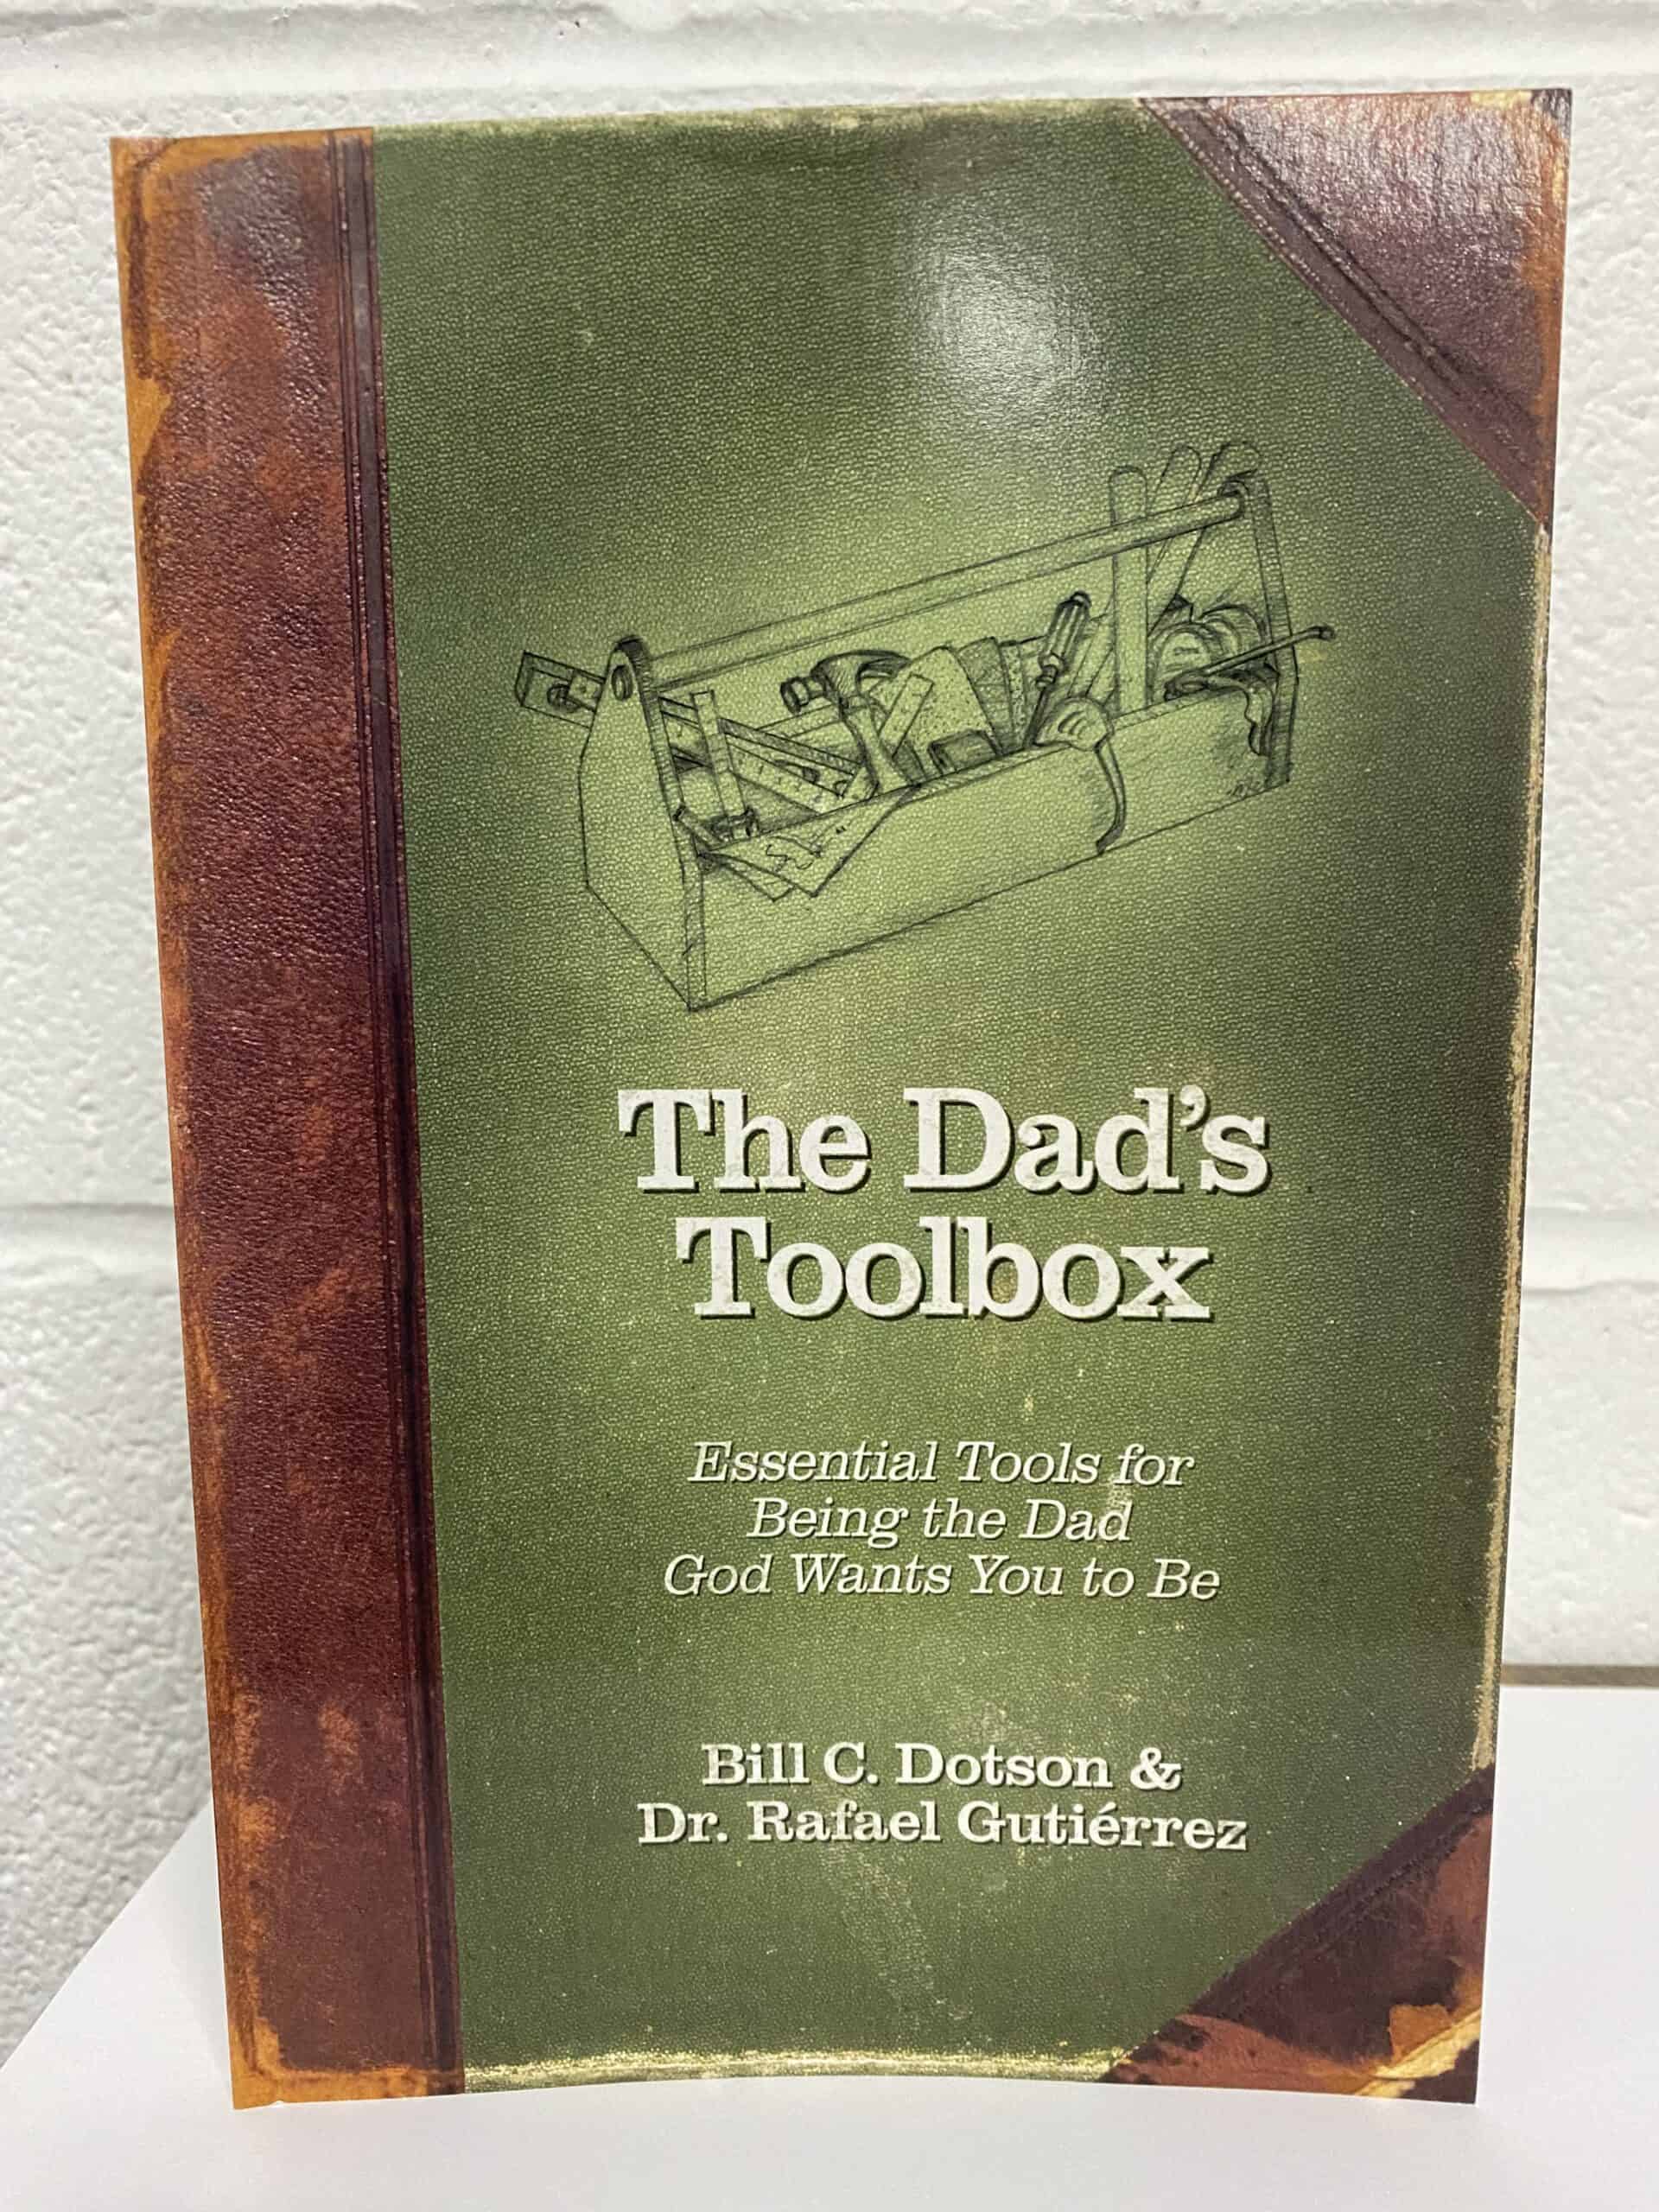 image of The Dad's Toolbox book. It has a toolbox on the cover with a green background.